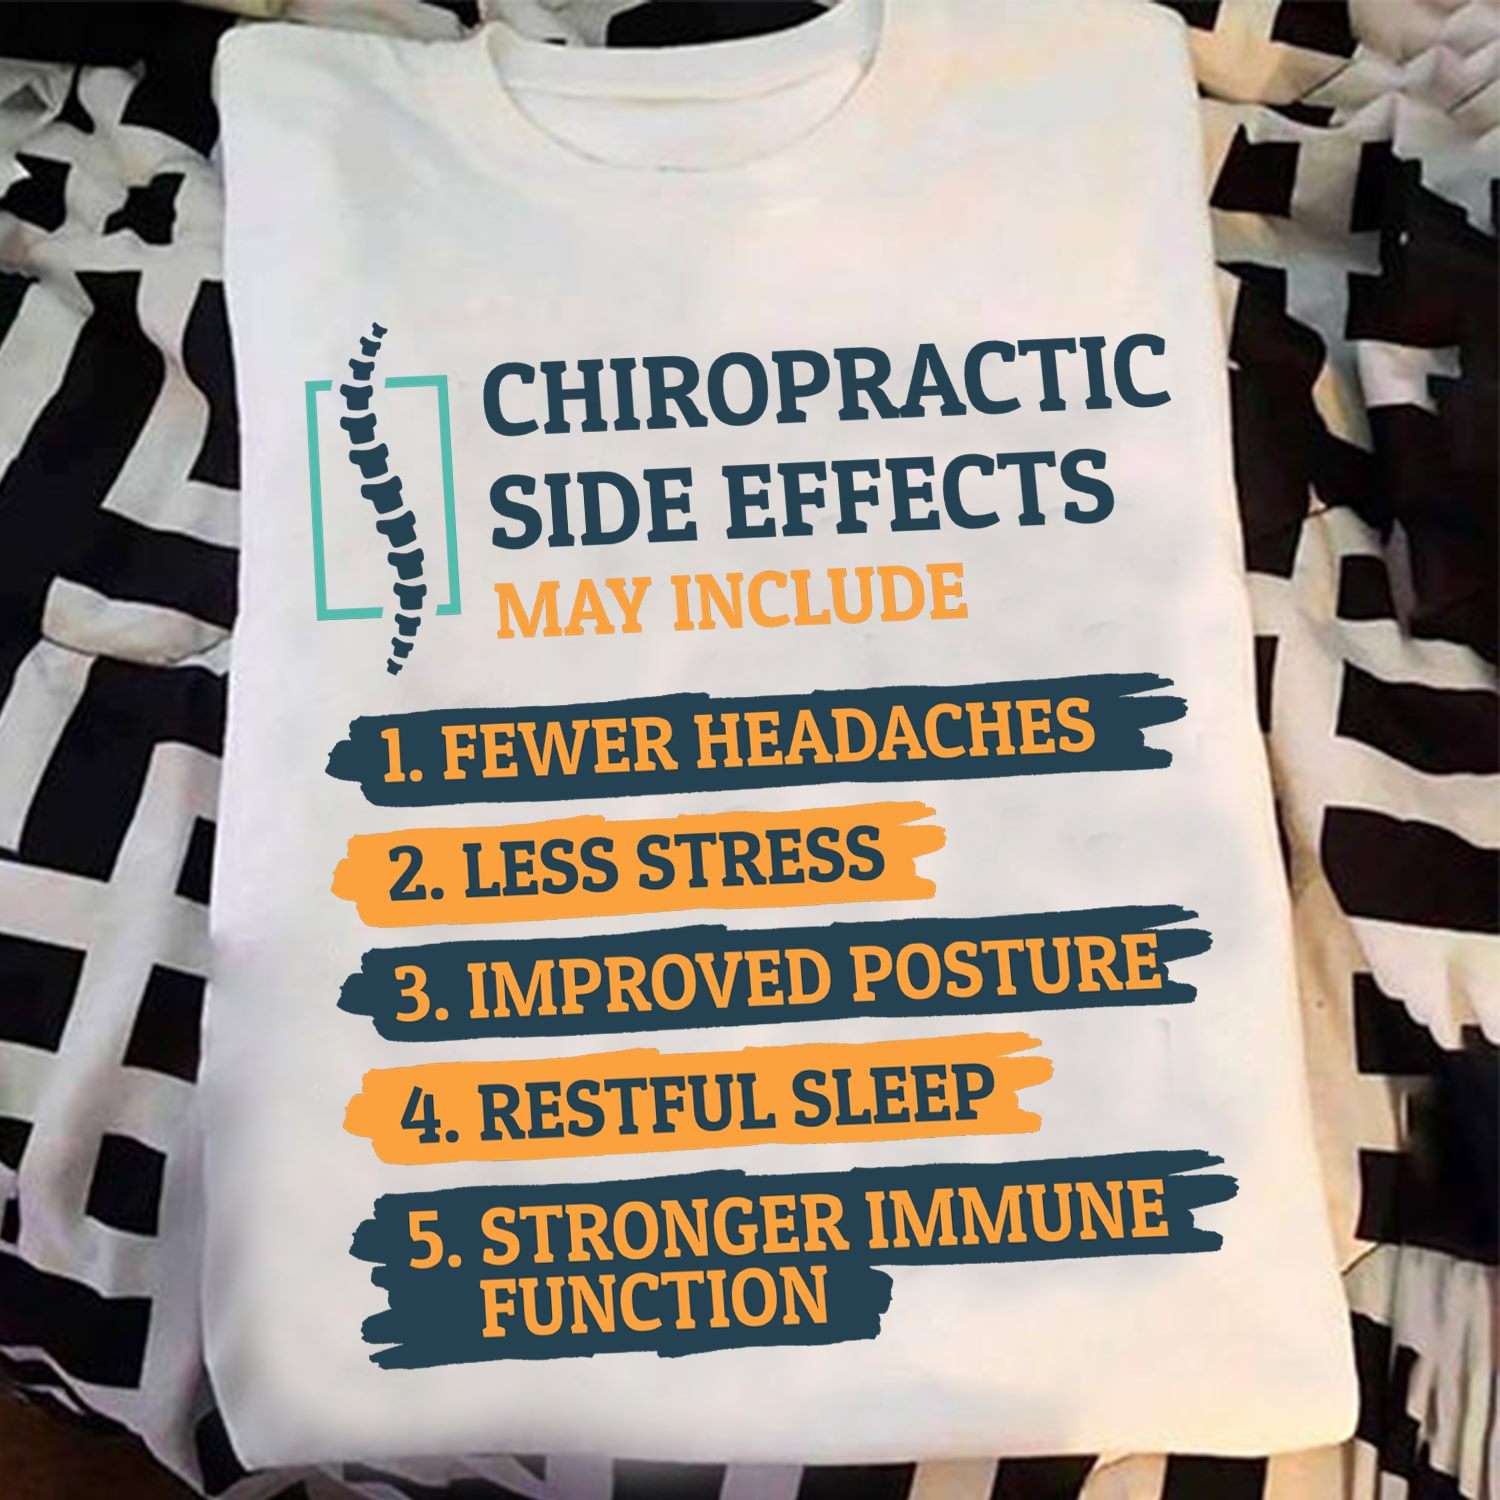 Chiropractic side effects may include fewer headaches less stress improved posture